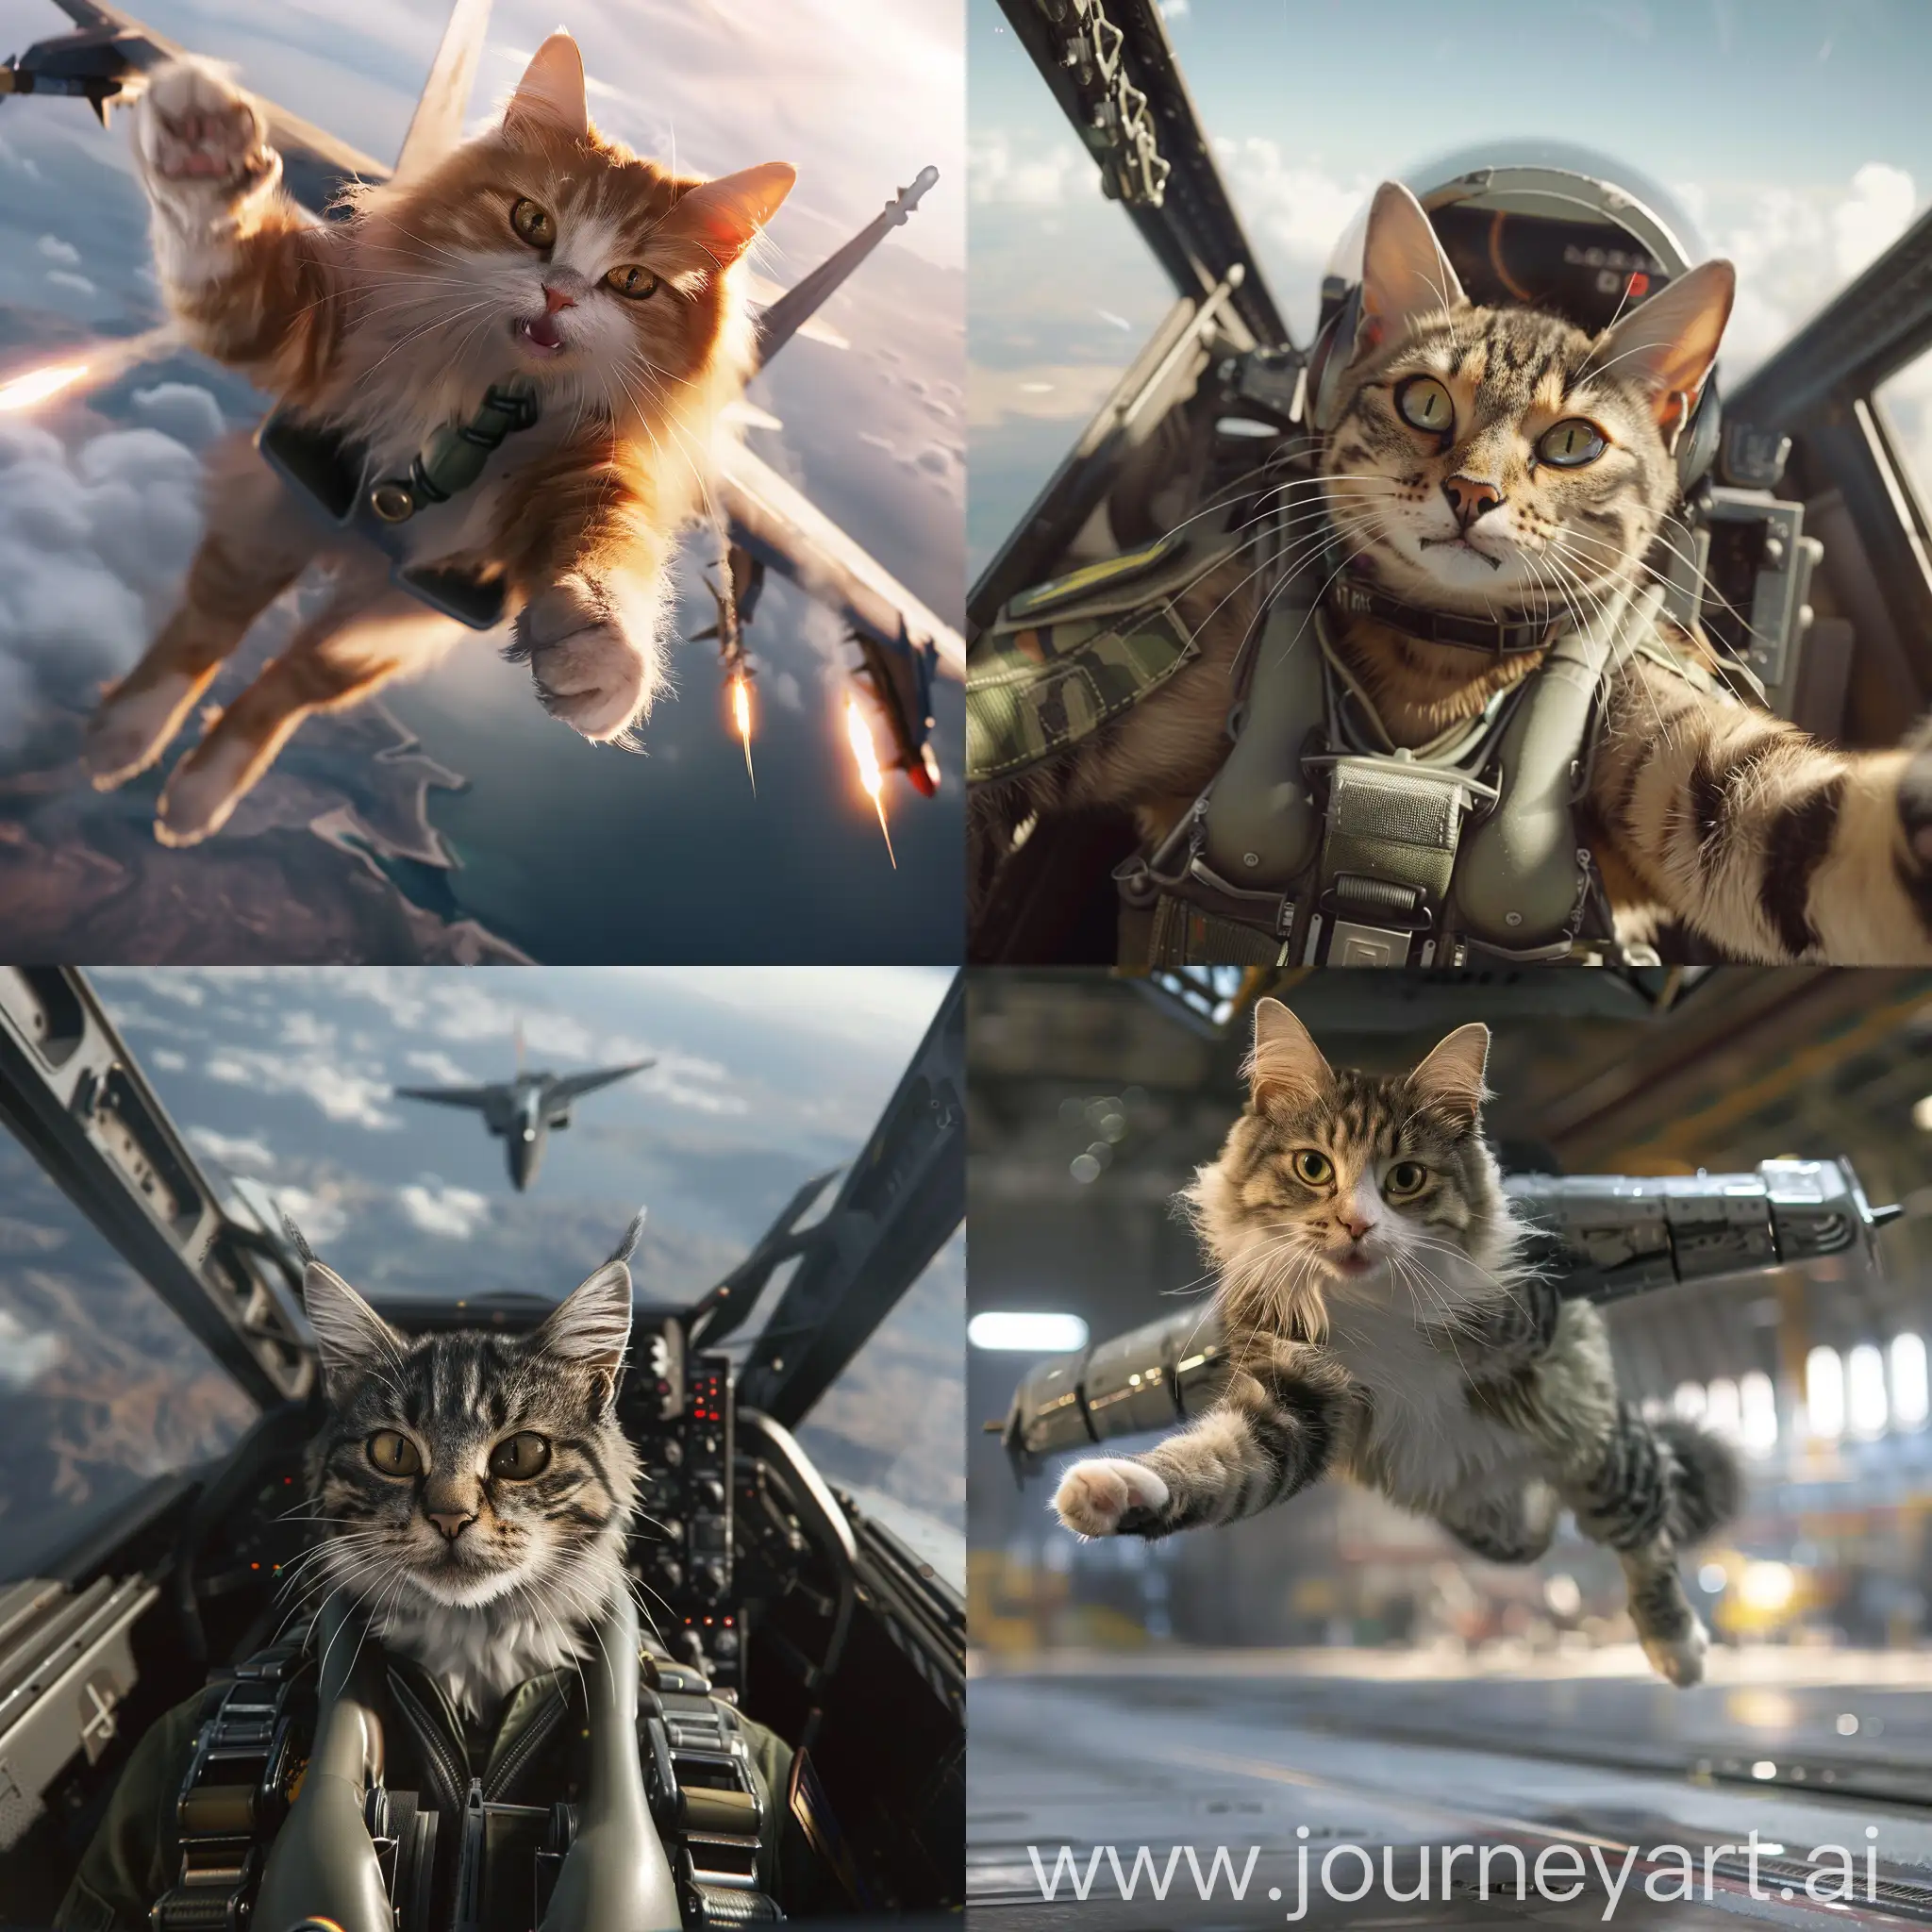 arsenal bird from ace combat 7 but it is a cat who launch a cat